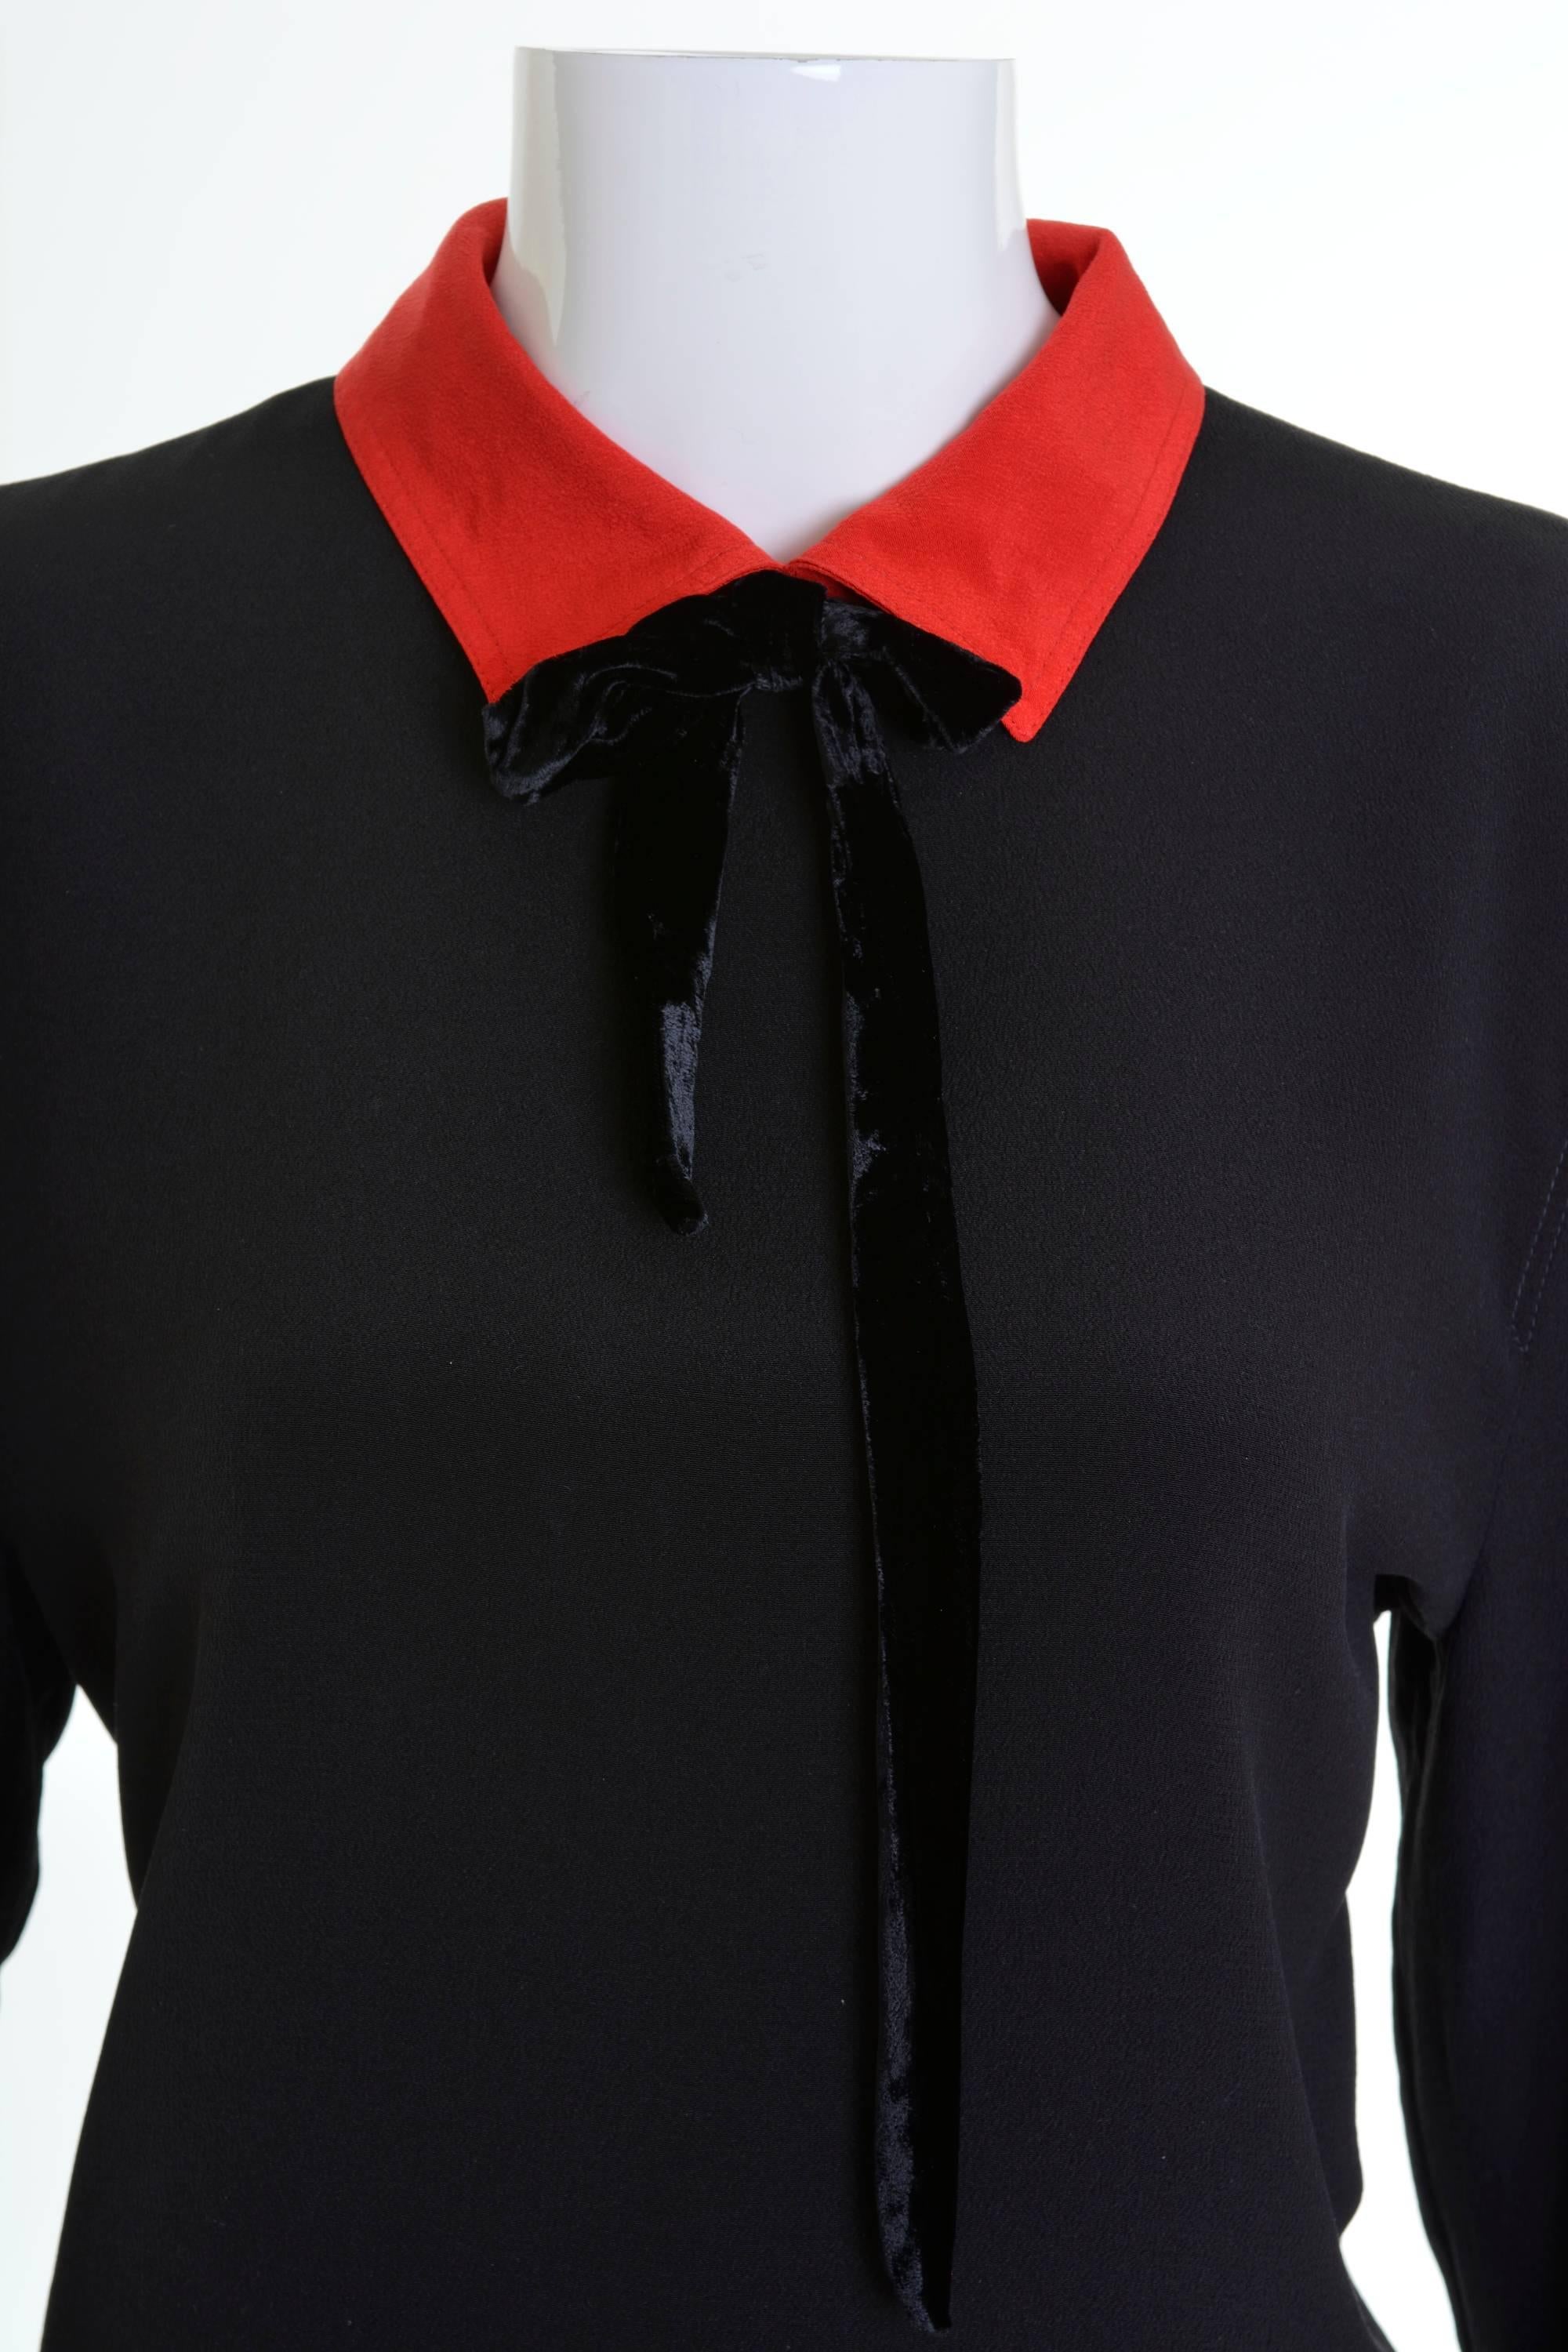 Women's 1980s VALENTINO Boutique Black and Red Silk Blouse Shirt For Sale